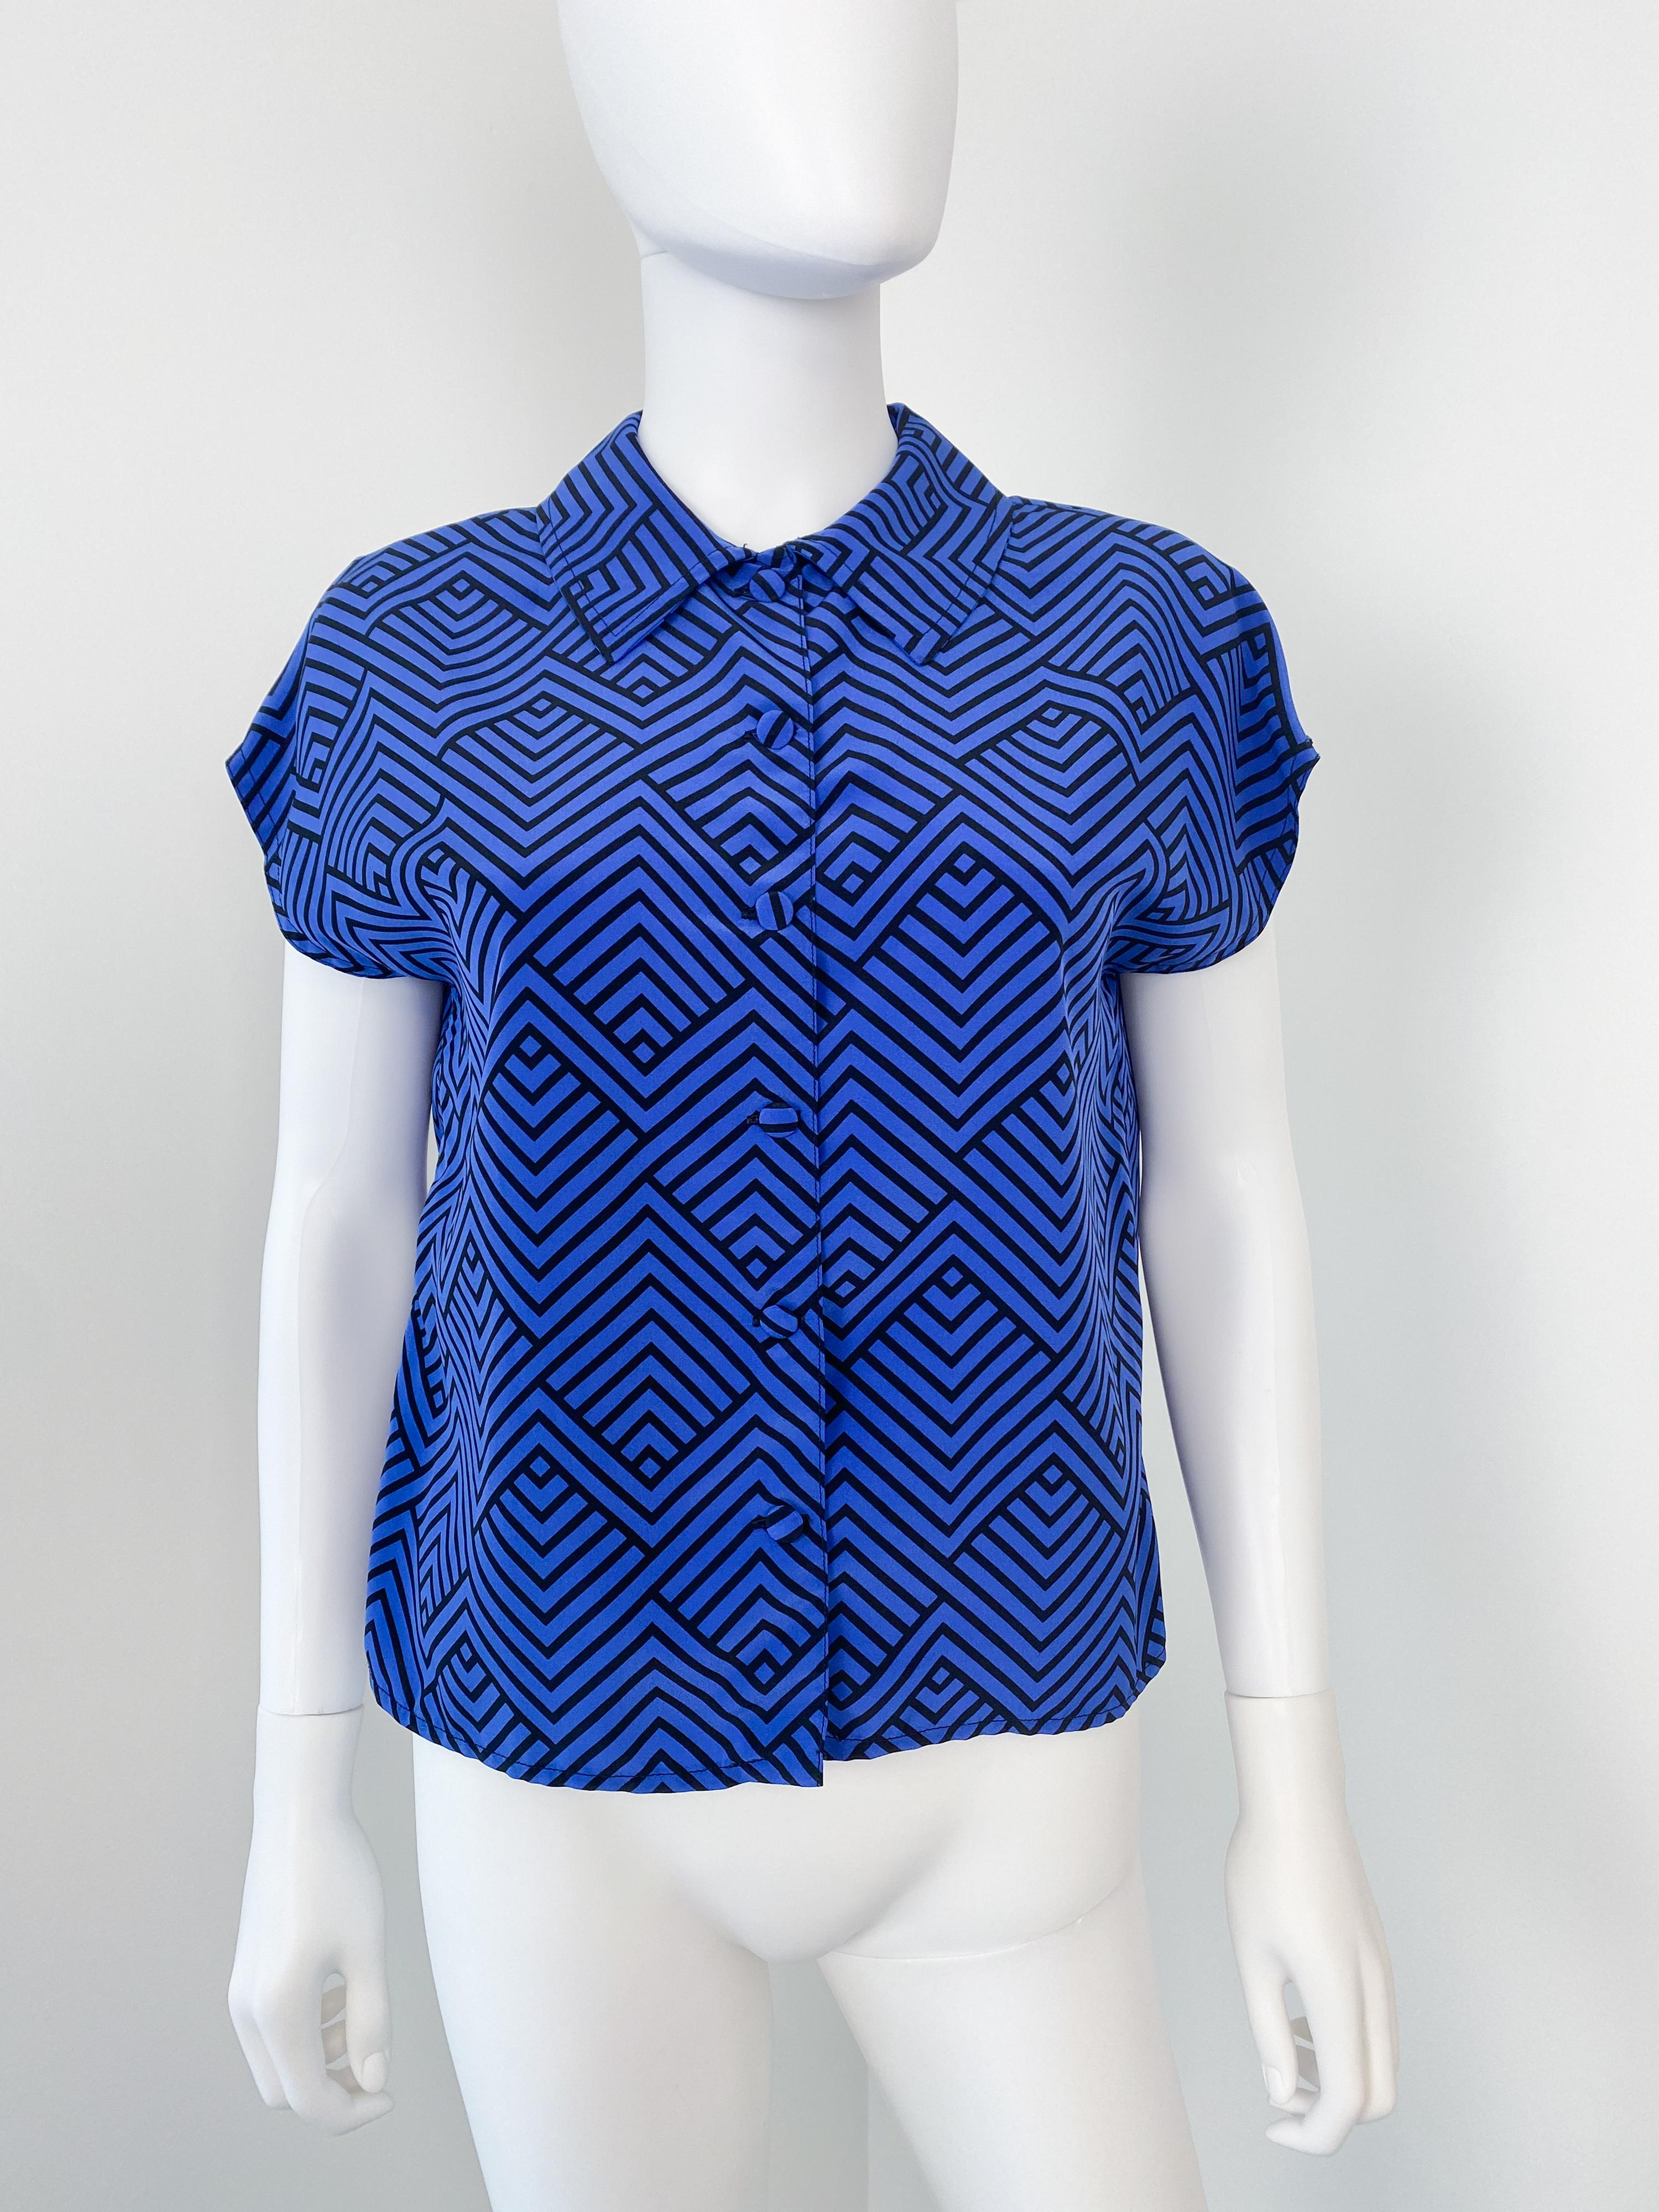 Vintage 1980s Silky Polyester Blouse Top Black and Blue ZigZag Size 8/10 In Excellent Condition For Sale In Atlanta, GA